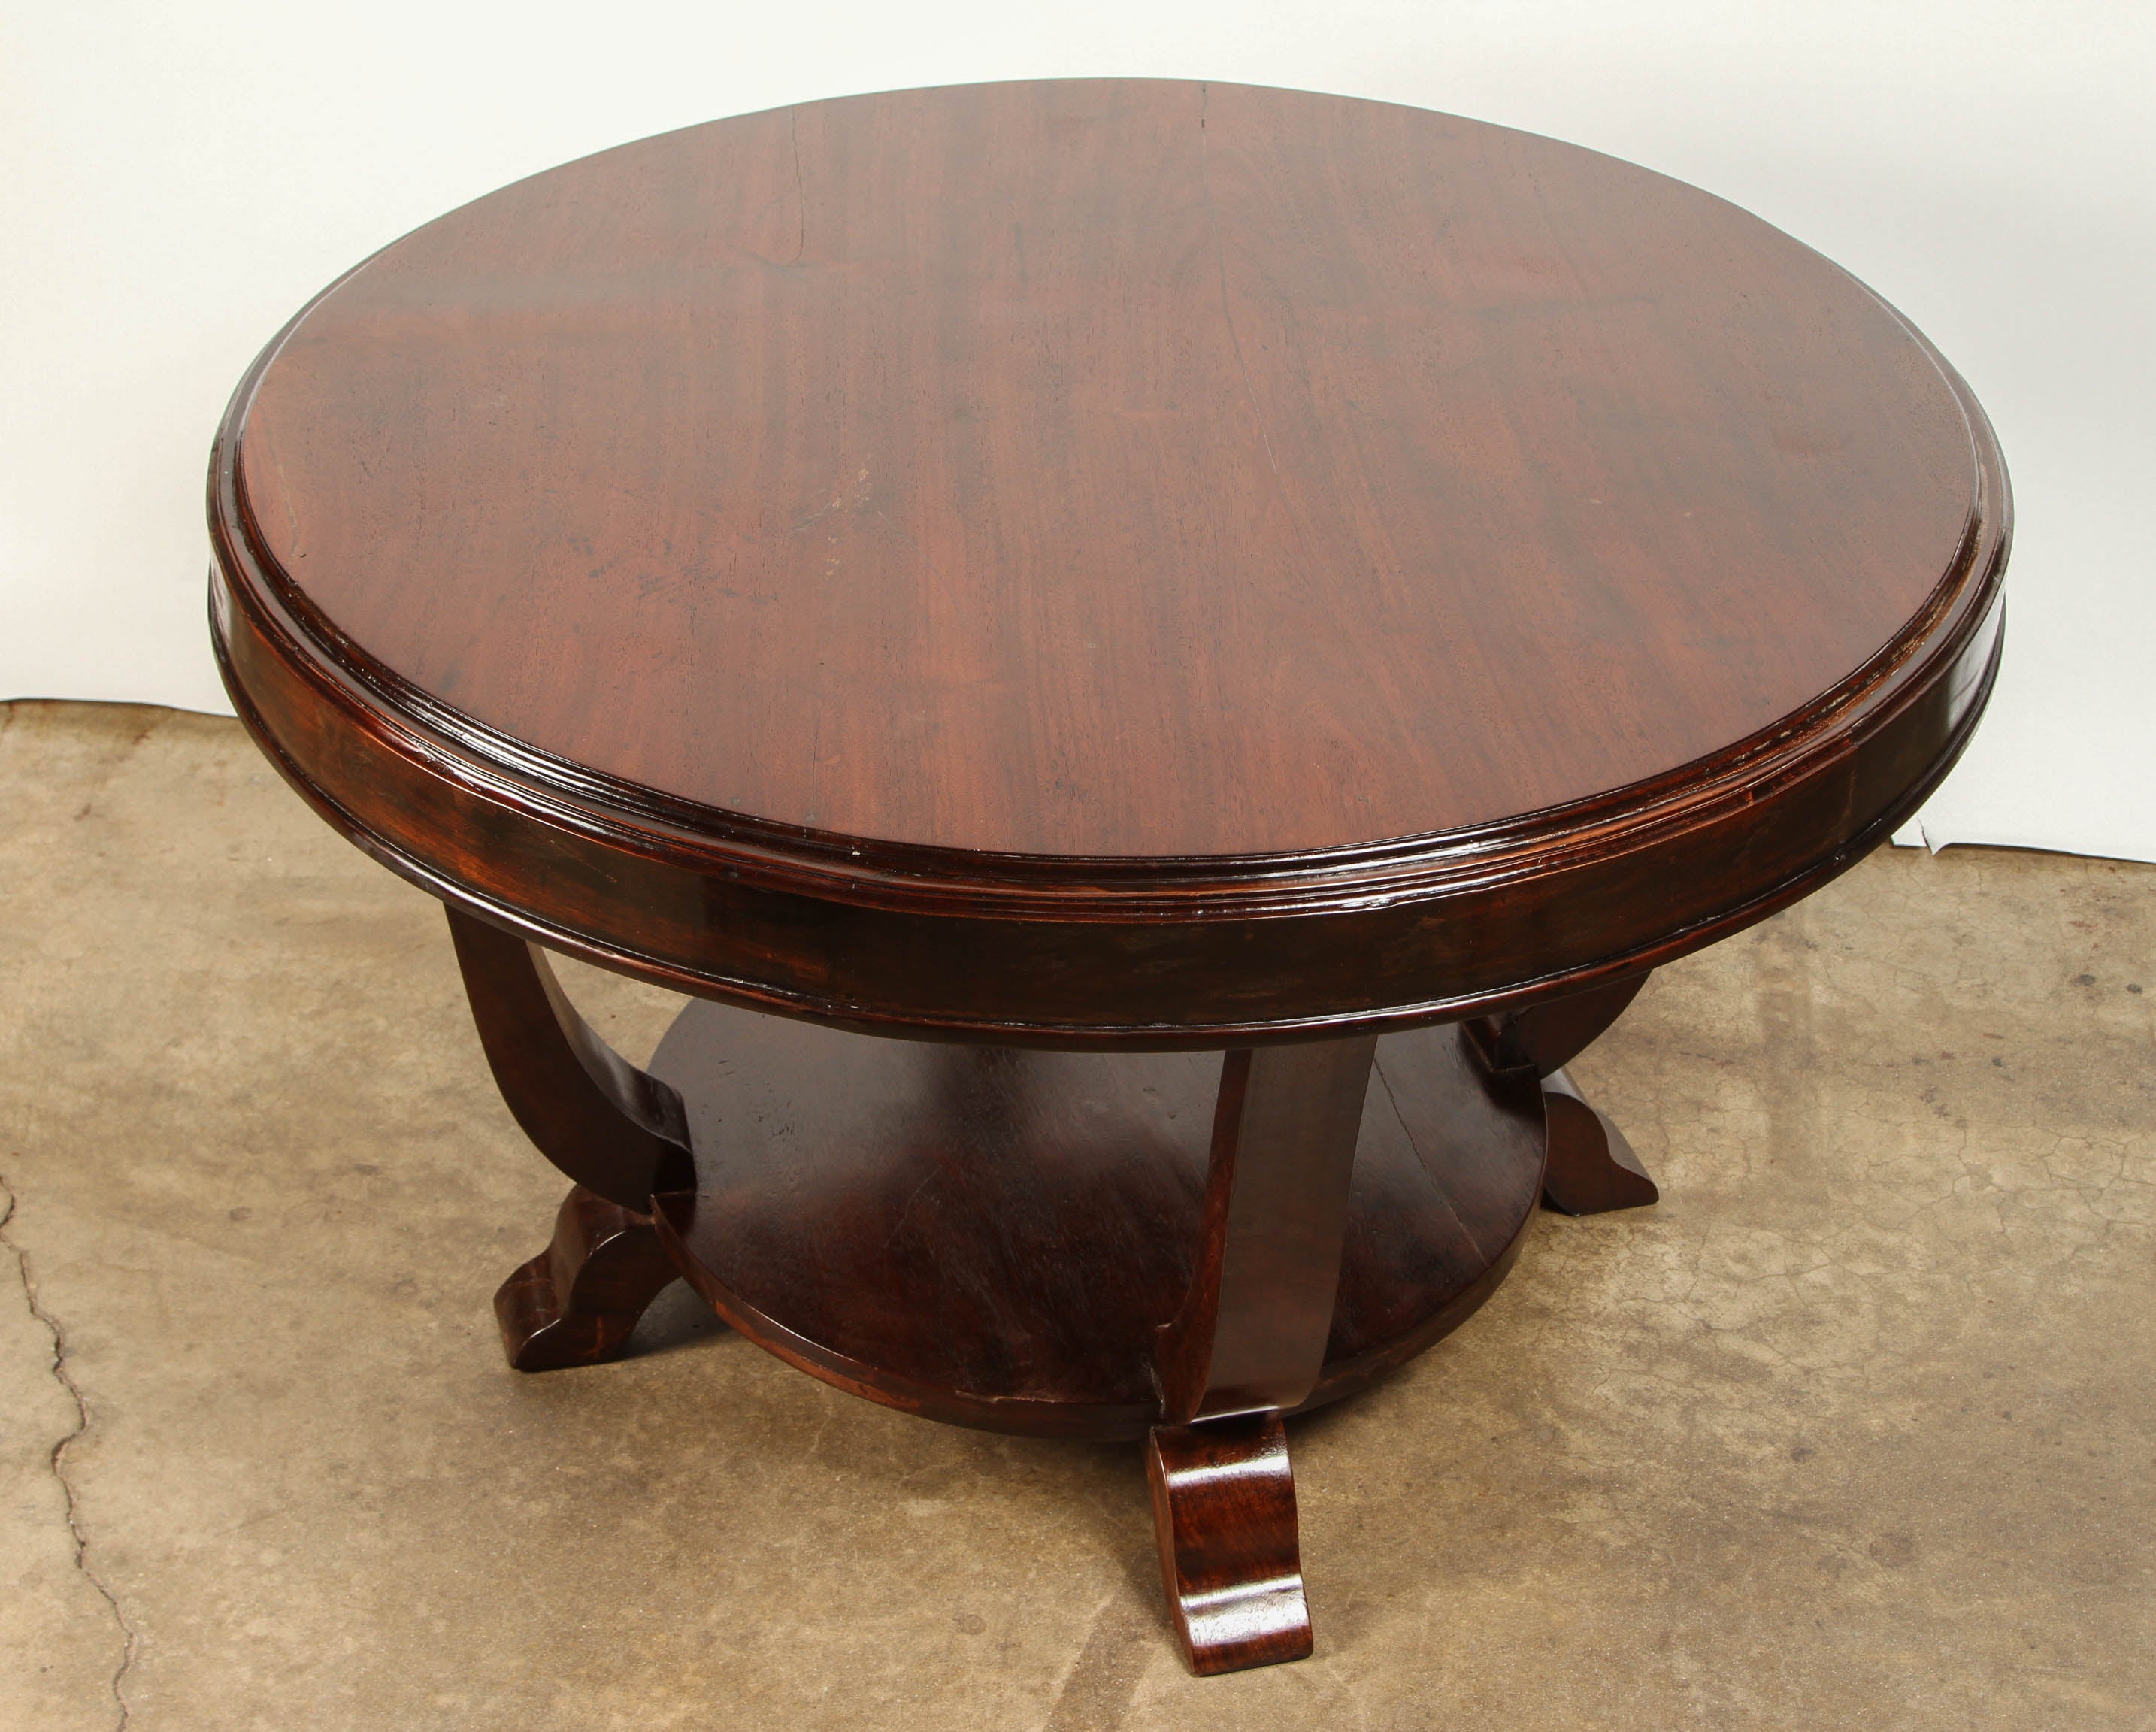 Handsome and large round table of solid rosewood. Made for the local French expatriates in the Art Deco style.